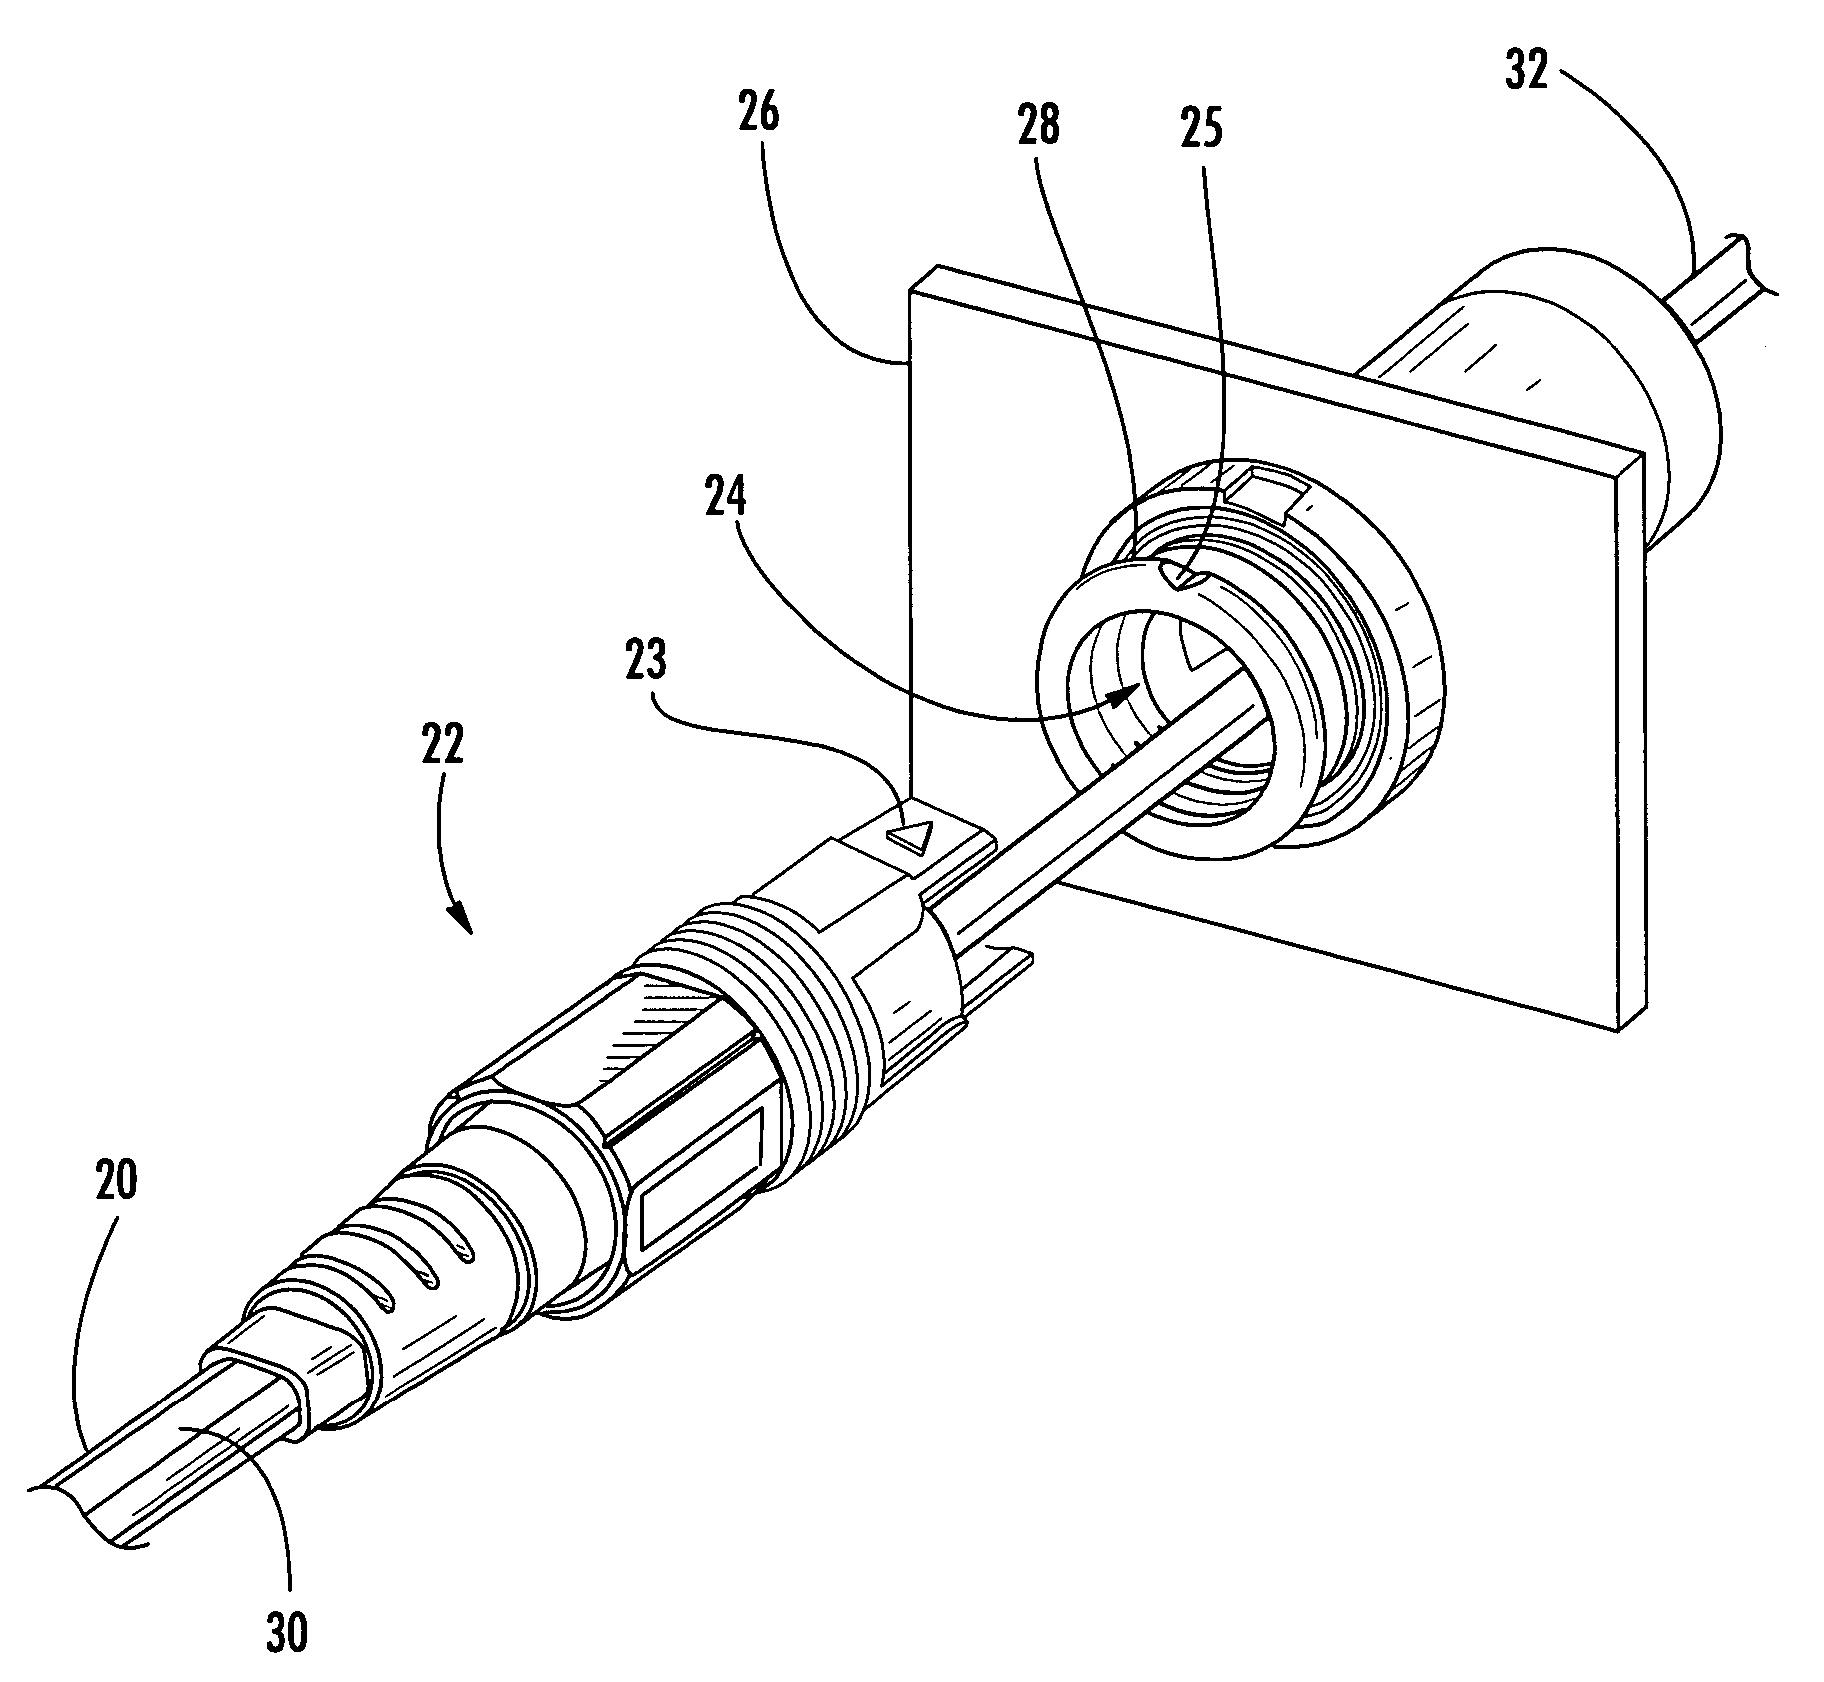 Fiber optic cable and plug assembly